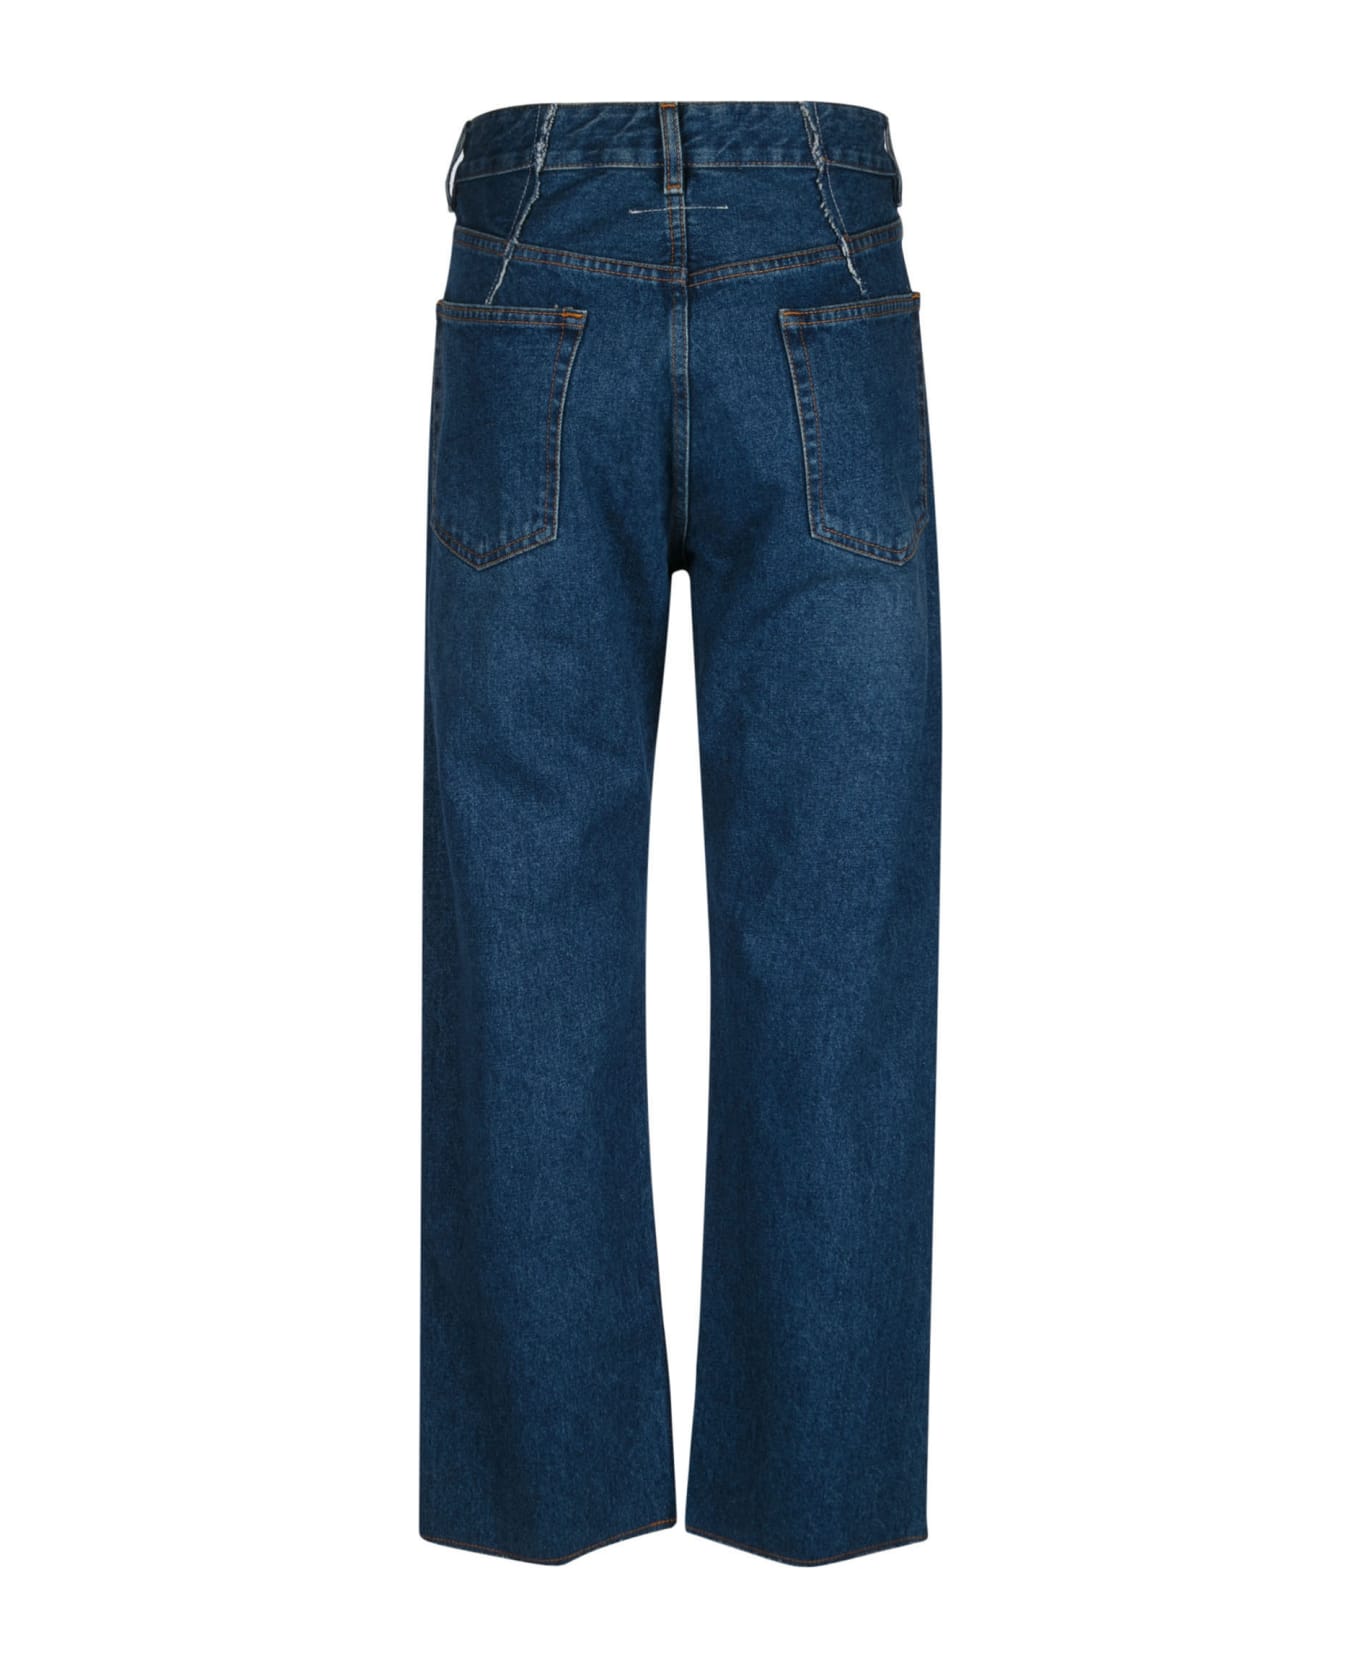 Maison Margiela Classic Fitted Jeans - 961